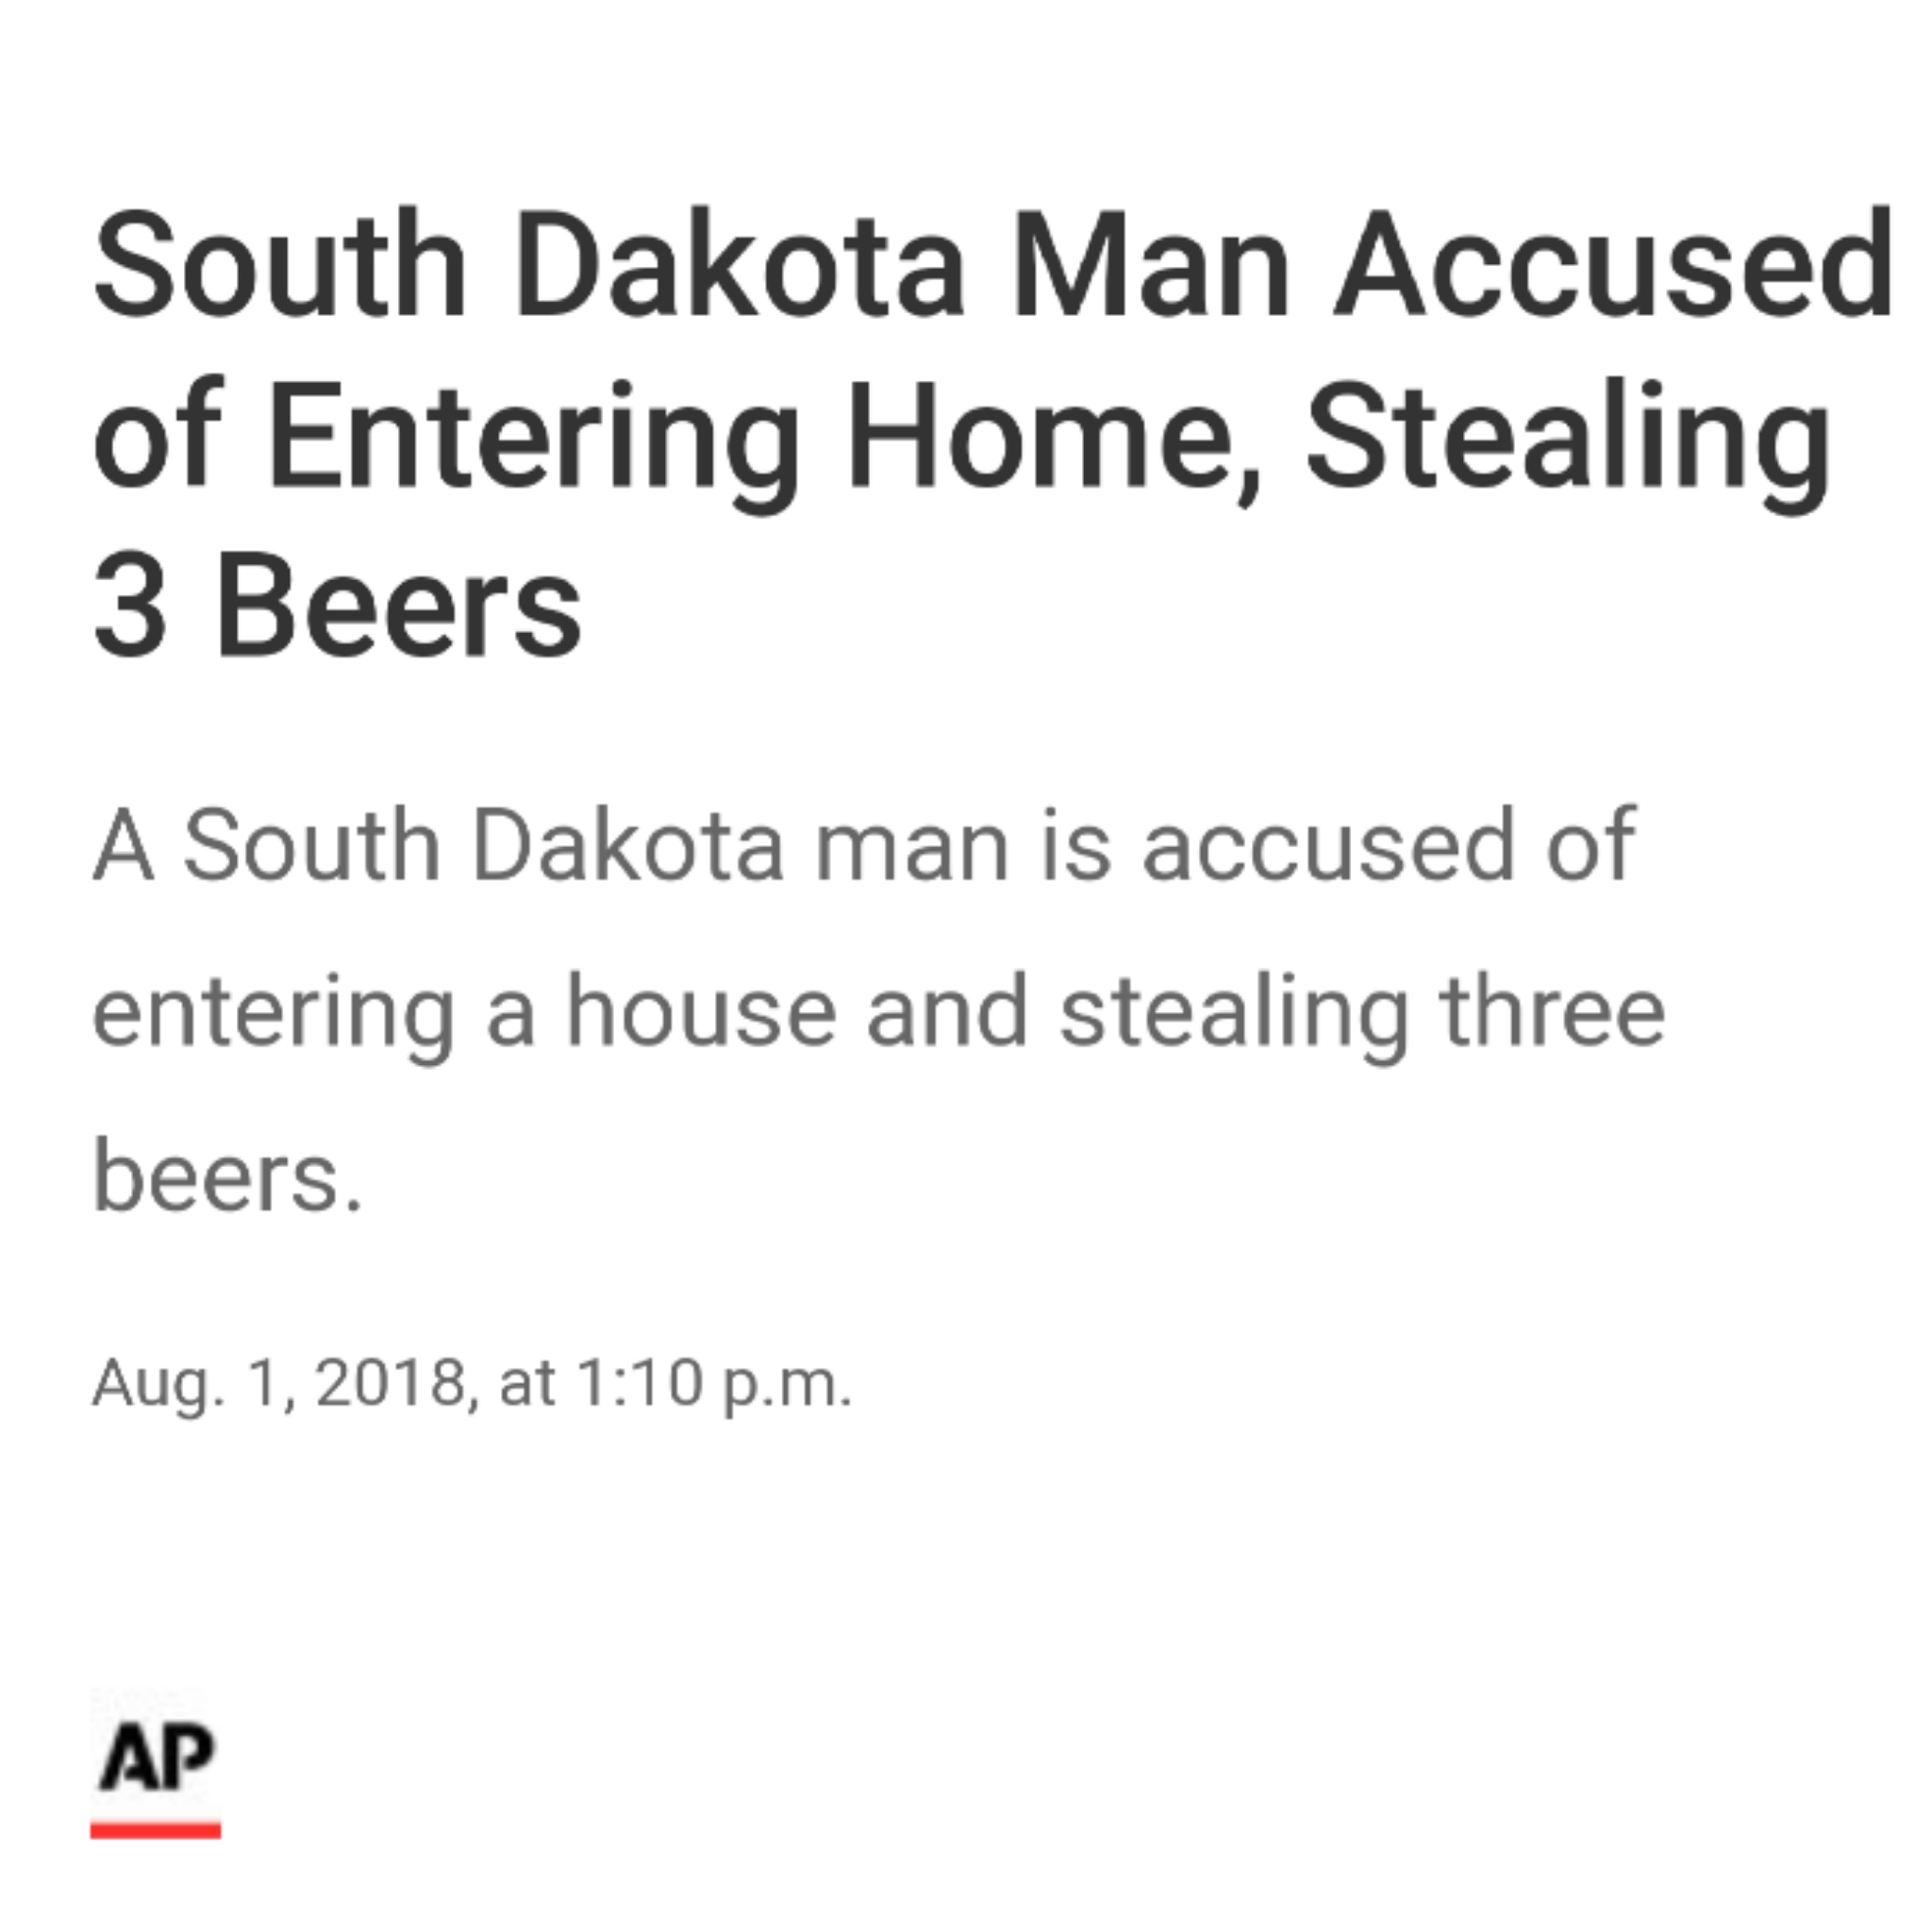 equivalent mole 2 reactants - South Dakota Man Accused of Entering Home, Stealing 3 Beers A South Dakota man is accused of entering a house and stealing three beers. Aug. 1, 2018, at p.m. Ap